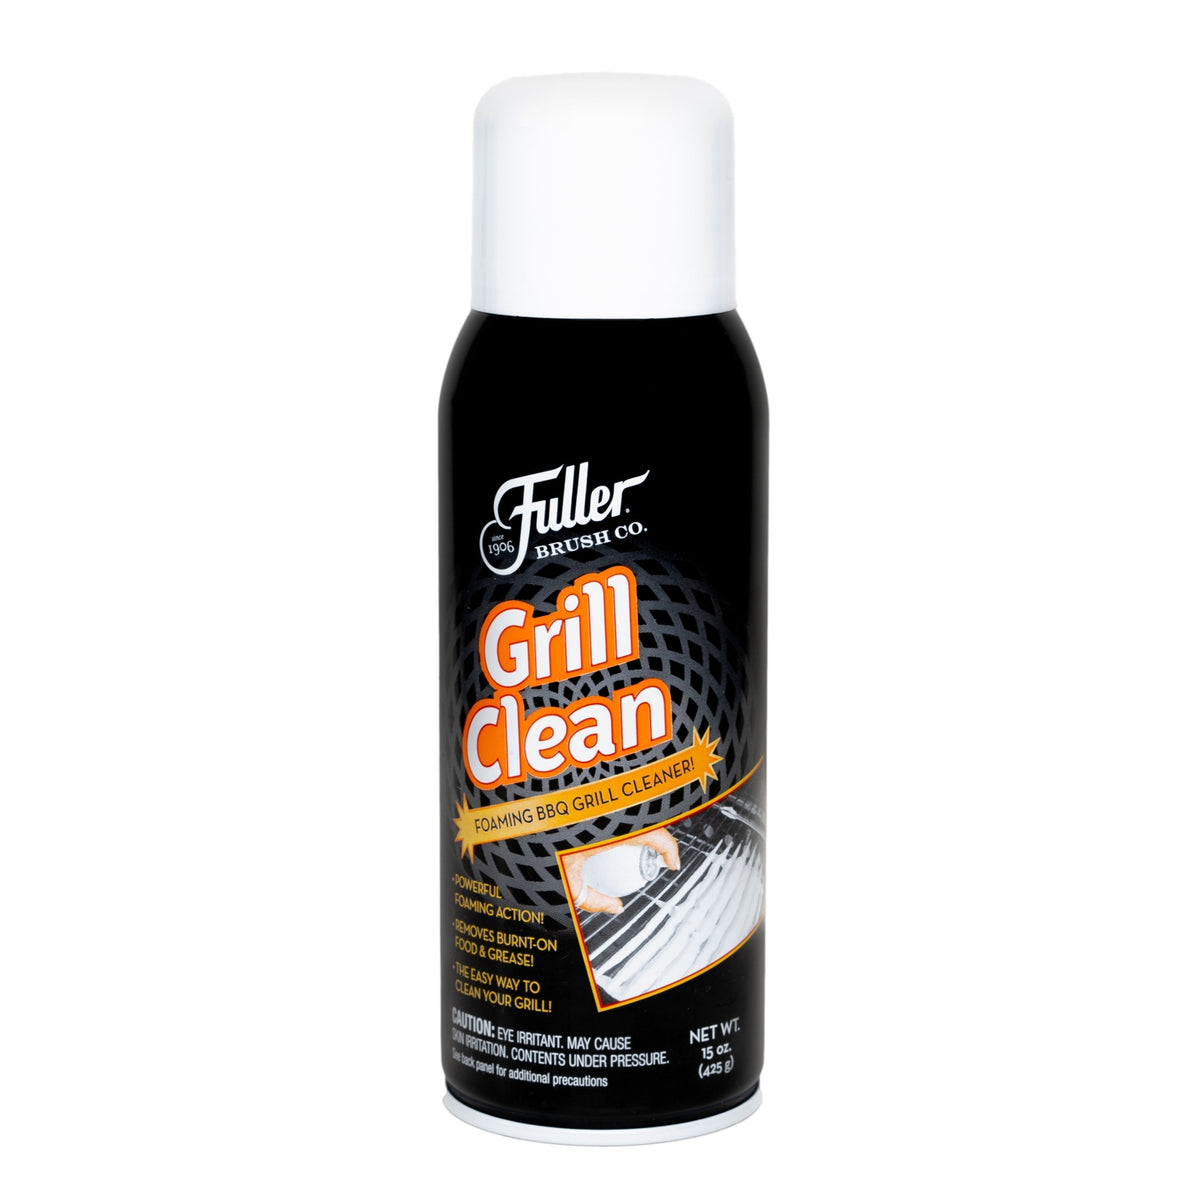 Safe/Clean Oven & Grill Cleaner Spray Heavy Duty - 2 Bottles, 1